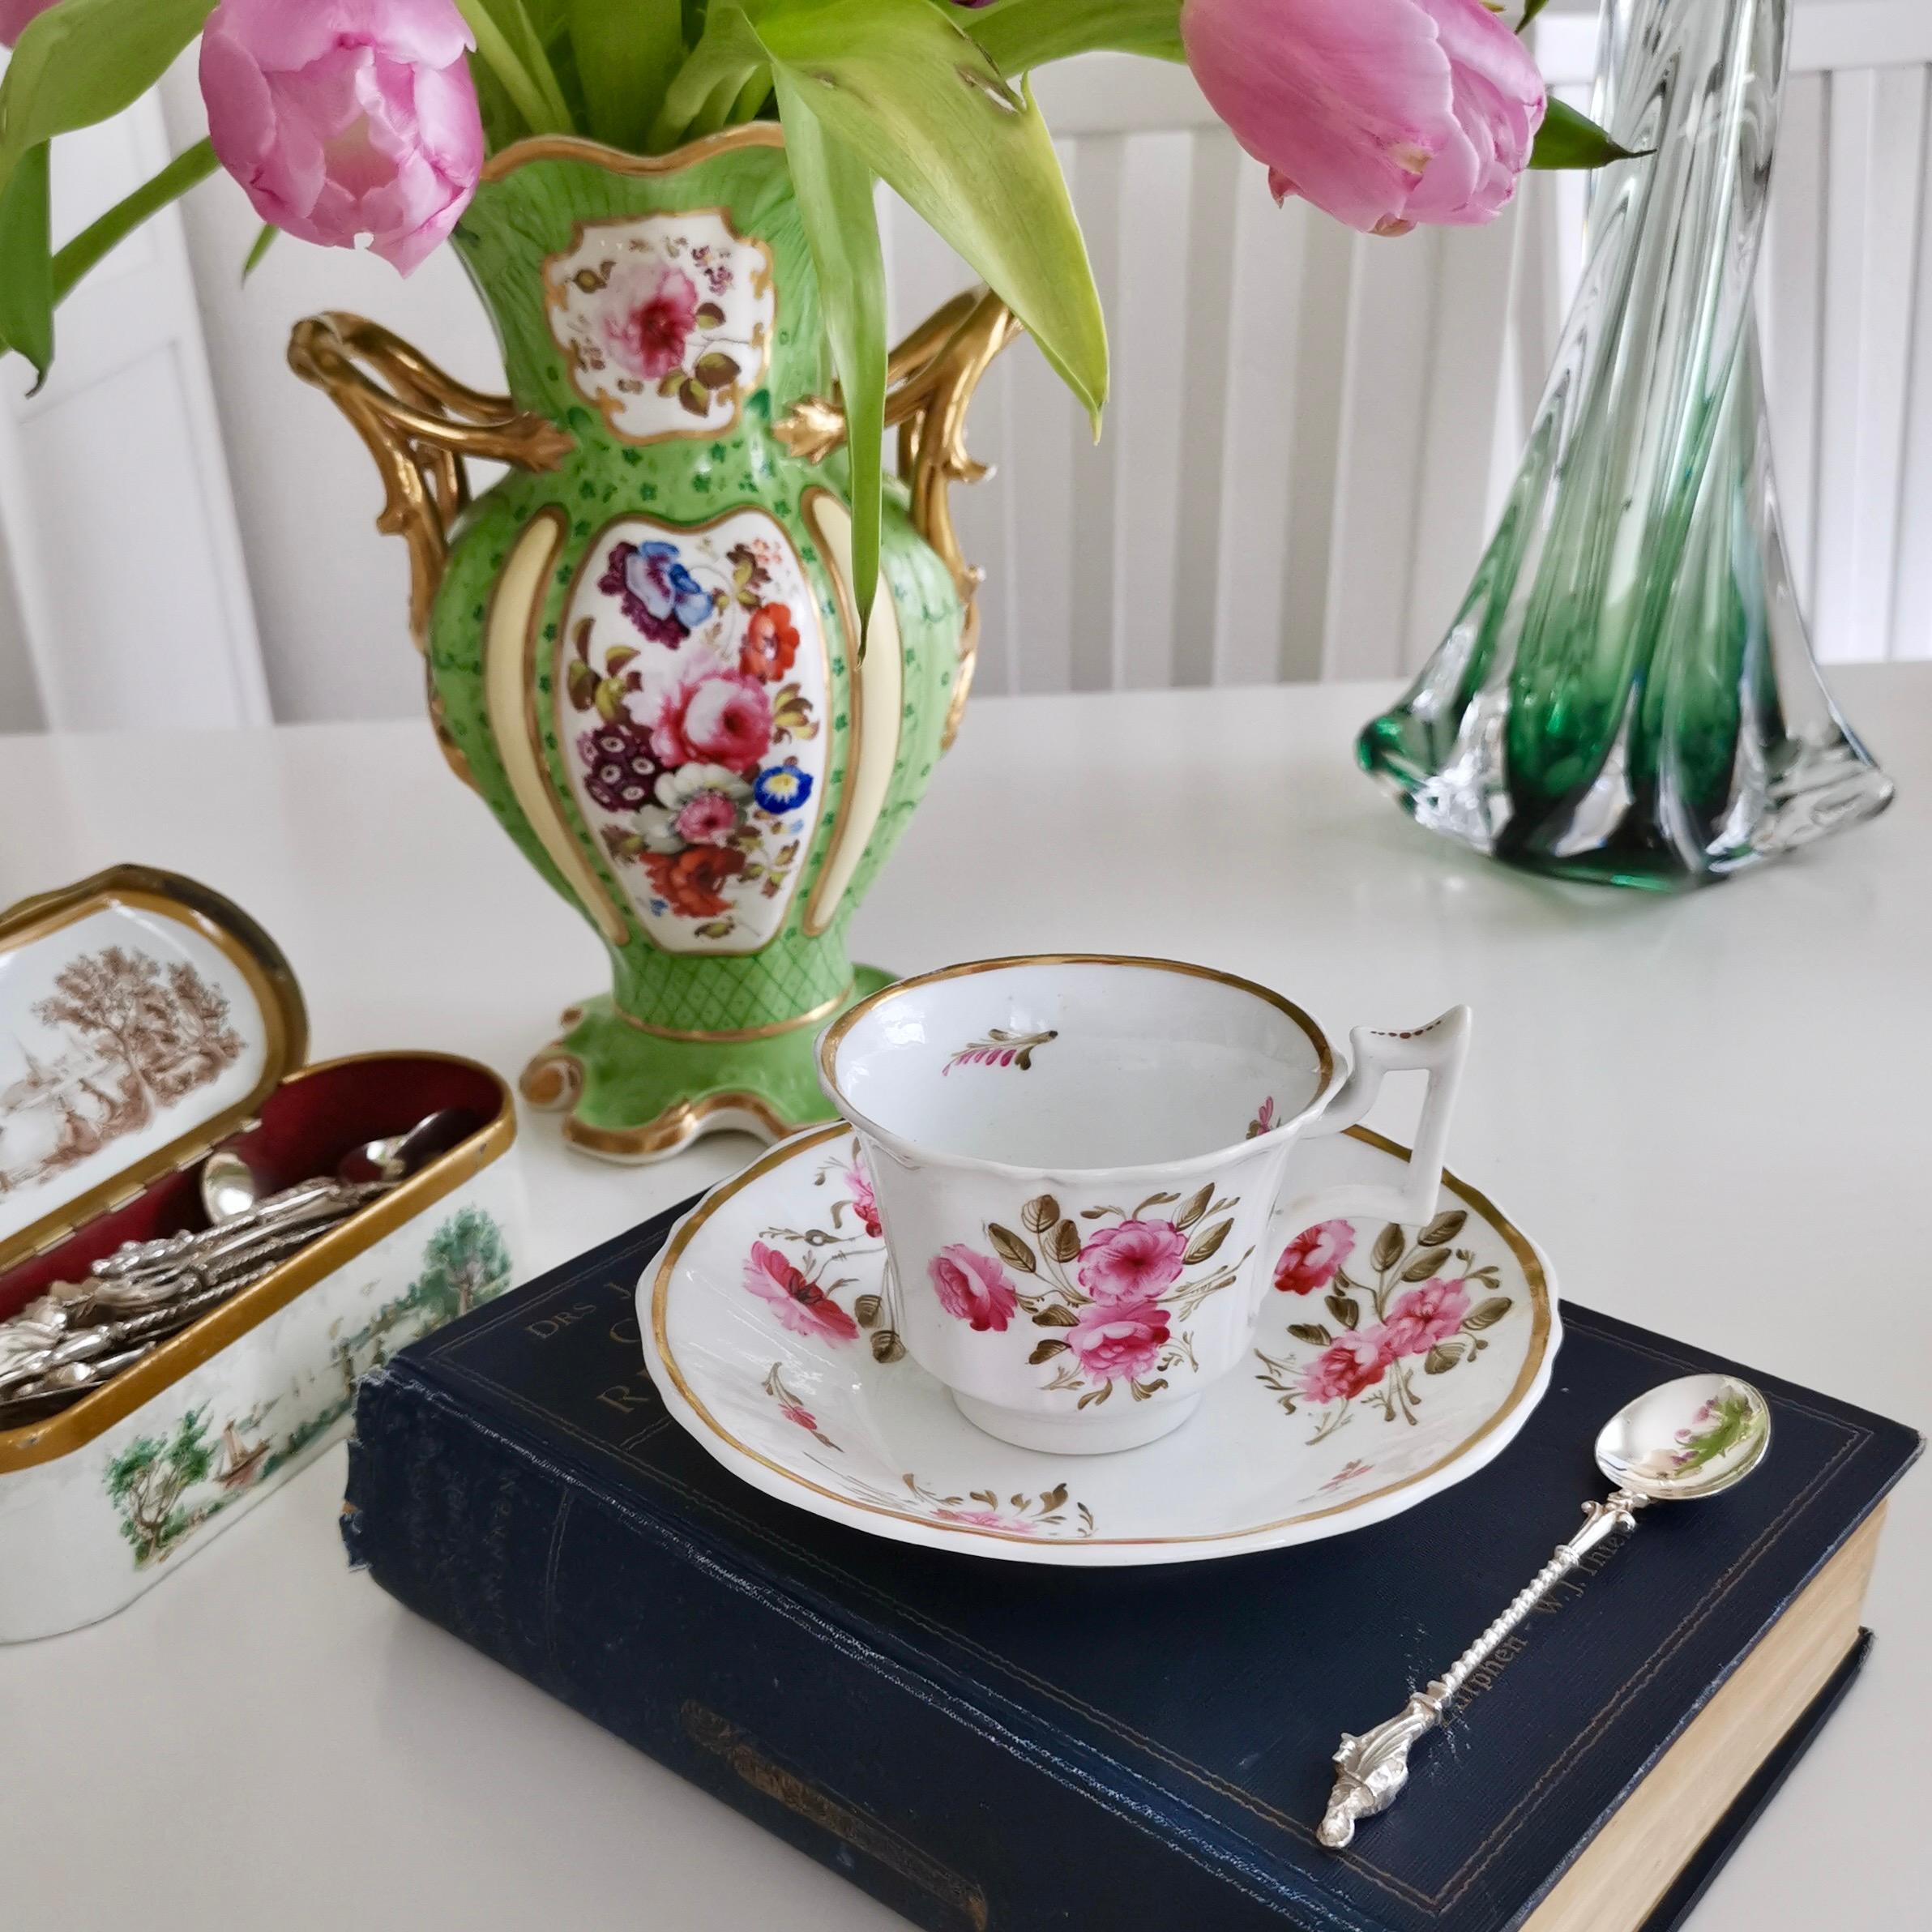 This is a very charming coffee cup and saucer made around 1825 by Ridgway. The set has a simple white ground with beautifully painted pink roses and sepia coloured foliage.

Ridgway was one of the pioneers of English china production alongside